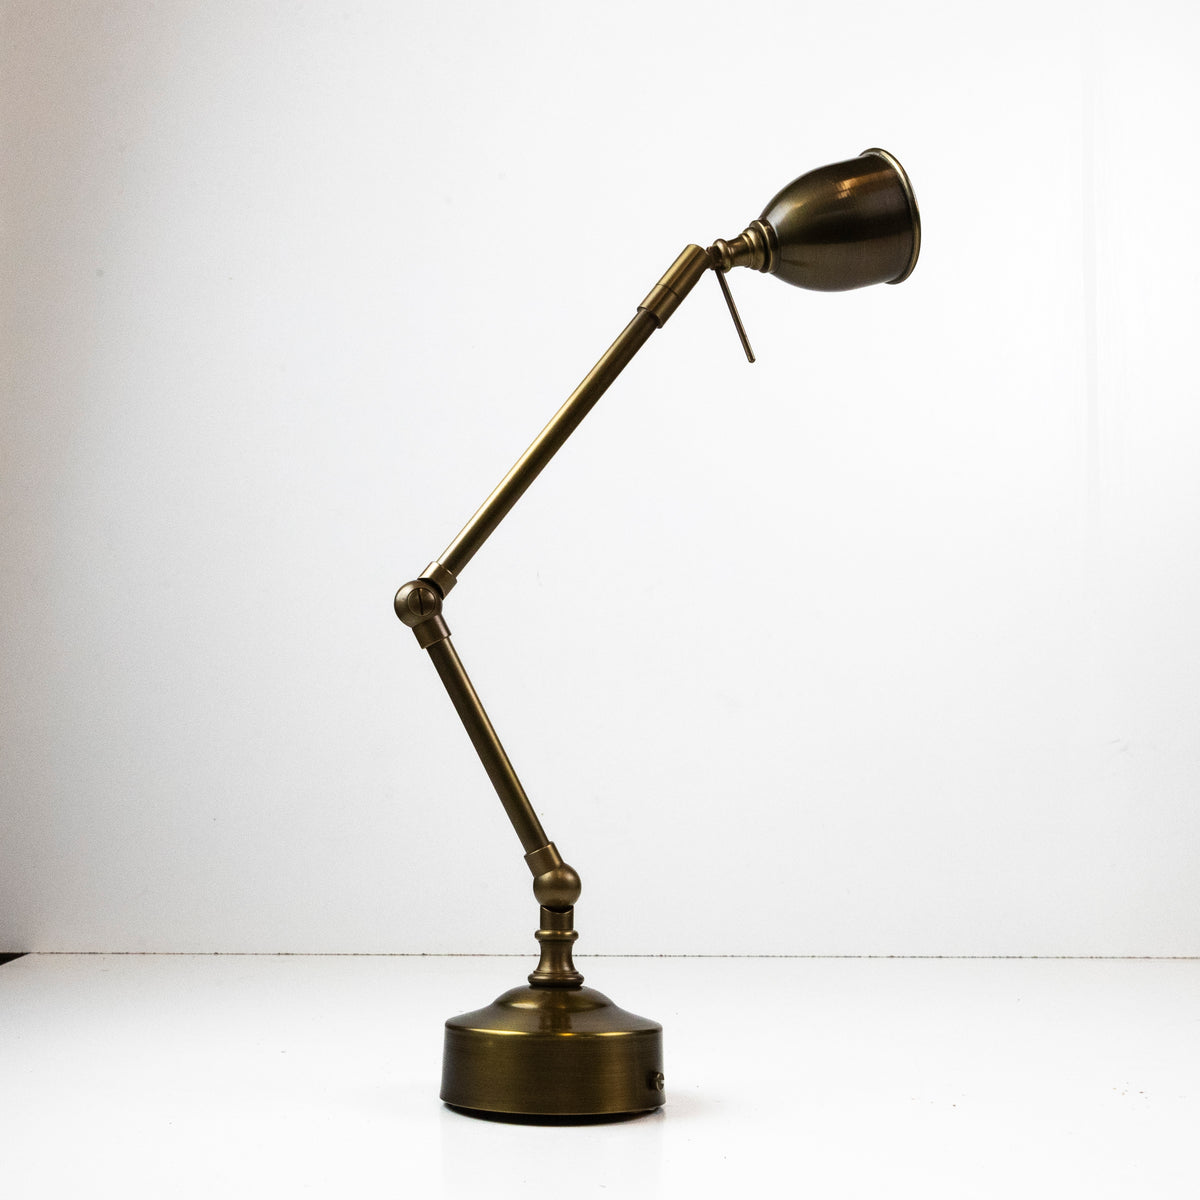 Adjustable Besselink &amp; Jones anglepoise wall Lamp | sconce in bronze finish | The Architectural Forum